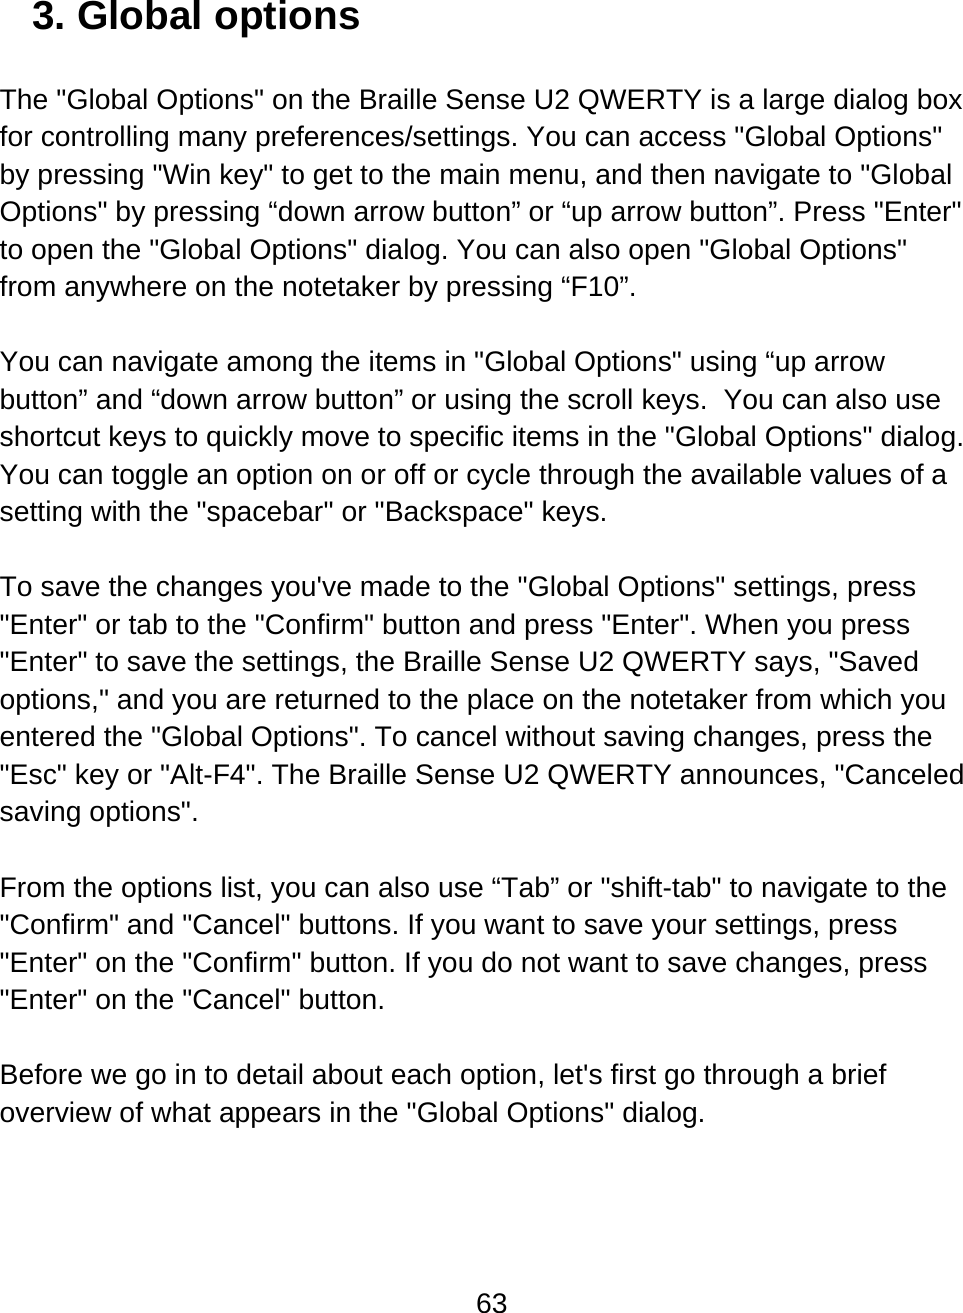 63  3. Global options  The &quot;Global Options&quot; on the Braille Sense U2 QWERTY is a large dialog box for controlling many preferences/settings. You can access &quot;Global Options&quot; by pressing &quot;Win key&quot; to get to the main menu, and then navigate to &quot;Global Options&quot; by pressing “down arrow button” or “up arrow button”. Press &quot;Enter&quot; to open the &quot;Global Options&quot; dialog. You can also open &quot;Global Options&quot; from anywhere on the notetaker by pressing “F10”.   You can navigate among the items in &quot;Global Options&quot; using “up arrow button” and “down arrow button” or using the scroll keys.  You can also use shortcut keys to quickly move to specific items in the &quot;Global Options&quot; dialog. You can toggle an option on or off or cycle through the available values of a setting with the &quot;spacebar&quot; or &quot;Backspace&quot; keys.  To save the changes you&apos;ve made to the &quot;Global Options&quot; settings, press &quot;Enter&quot; or tab to the &quot;Confirm&quot; button and press &quot;Enter&quot;. When you press &quot;Enter&quot; to save the settings, the Braille Sense U2 QWERTY says, &quot;Saved options,&quot; and you are returned to the place on the notetaker from which you entered the &quot;Global Options&quot;. To cancel without saving changes, press the &quot;Esc&quot; key or &quot;Alt-F4&quot;. The Braille Sense U2 QWERTY announces, &quot;Canceled saving options&quot;.   From the options list, you can also use “Tab” or &quot;shift-tab&quot; to navigate to the &quot;Confirm&quot; and &quot;Cancel&quot; buttons. If you want to save your settings, press &quot;Enter&quot; on the &quot;Confirm&quot; button. If you do not want to save changes, press &quot;Enter&quot; on the &quot;Cancel&quot; button.  Before we go in to detail about each option, let&apos;s first go through a brief overview of what appears in the &quot;Global Options&quot; dialog.   